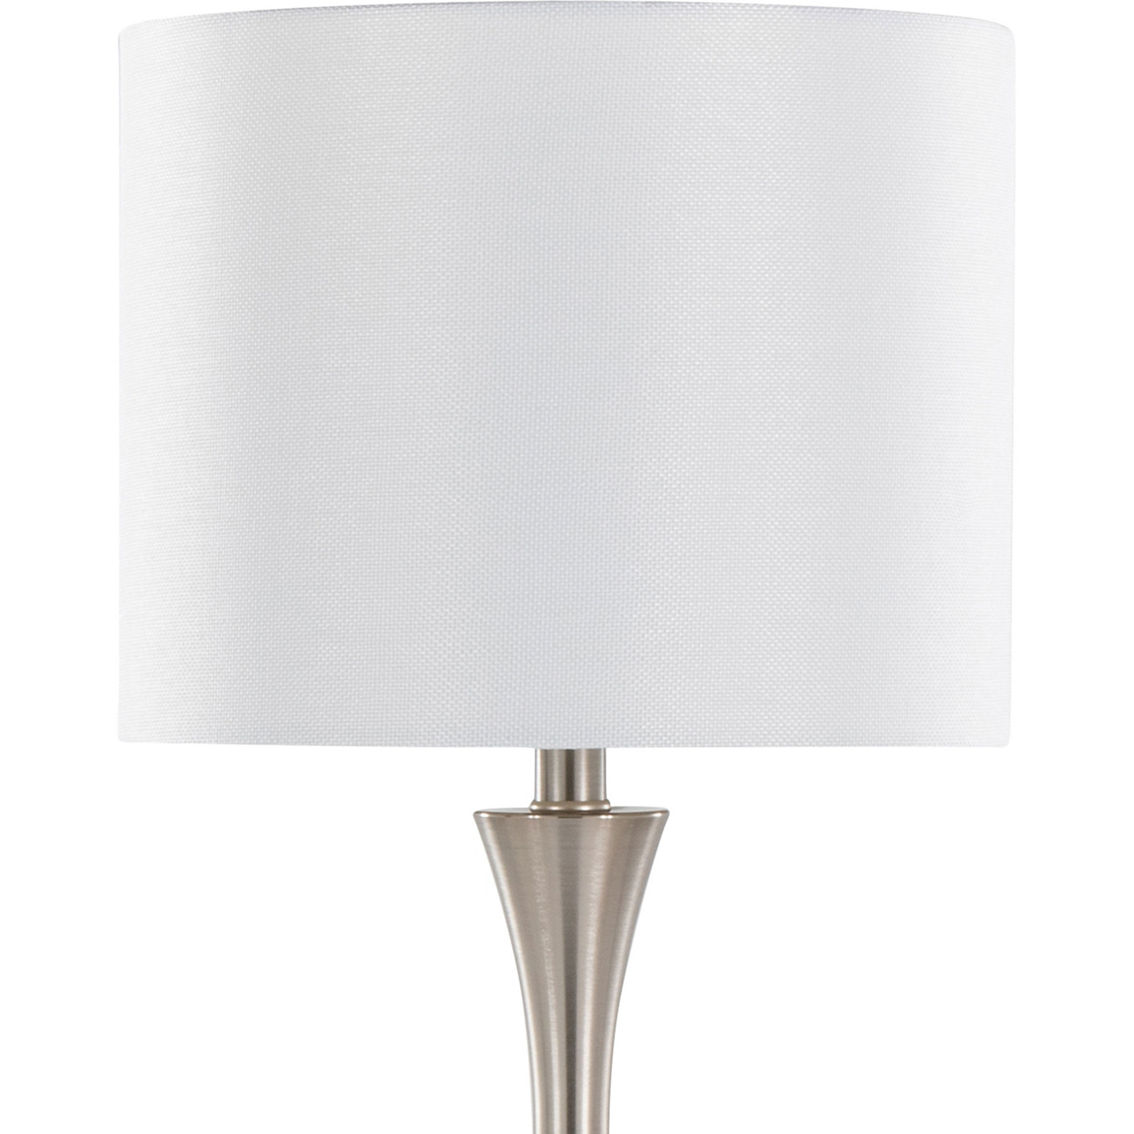 LumiSource Lenuxe 25.25 in. Metal Table Lamp with USB 2 pk. - Image 4 of 9